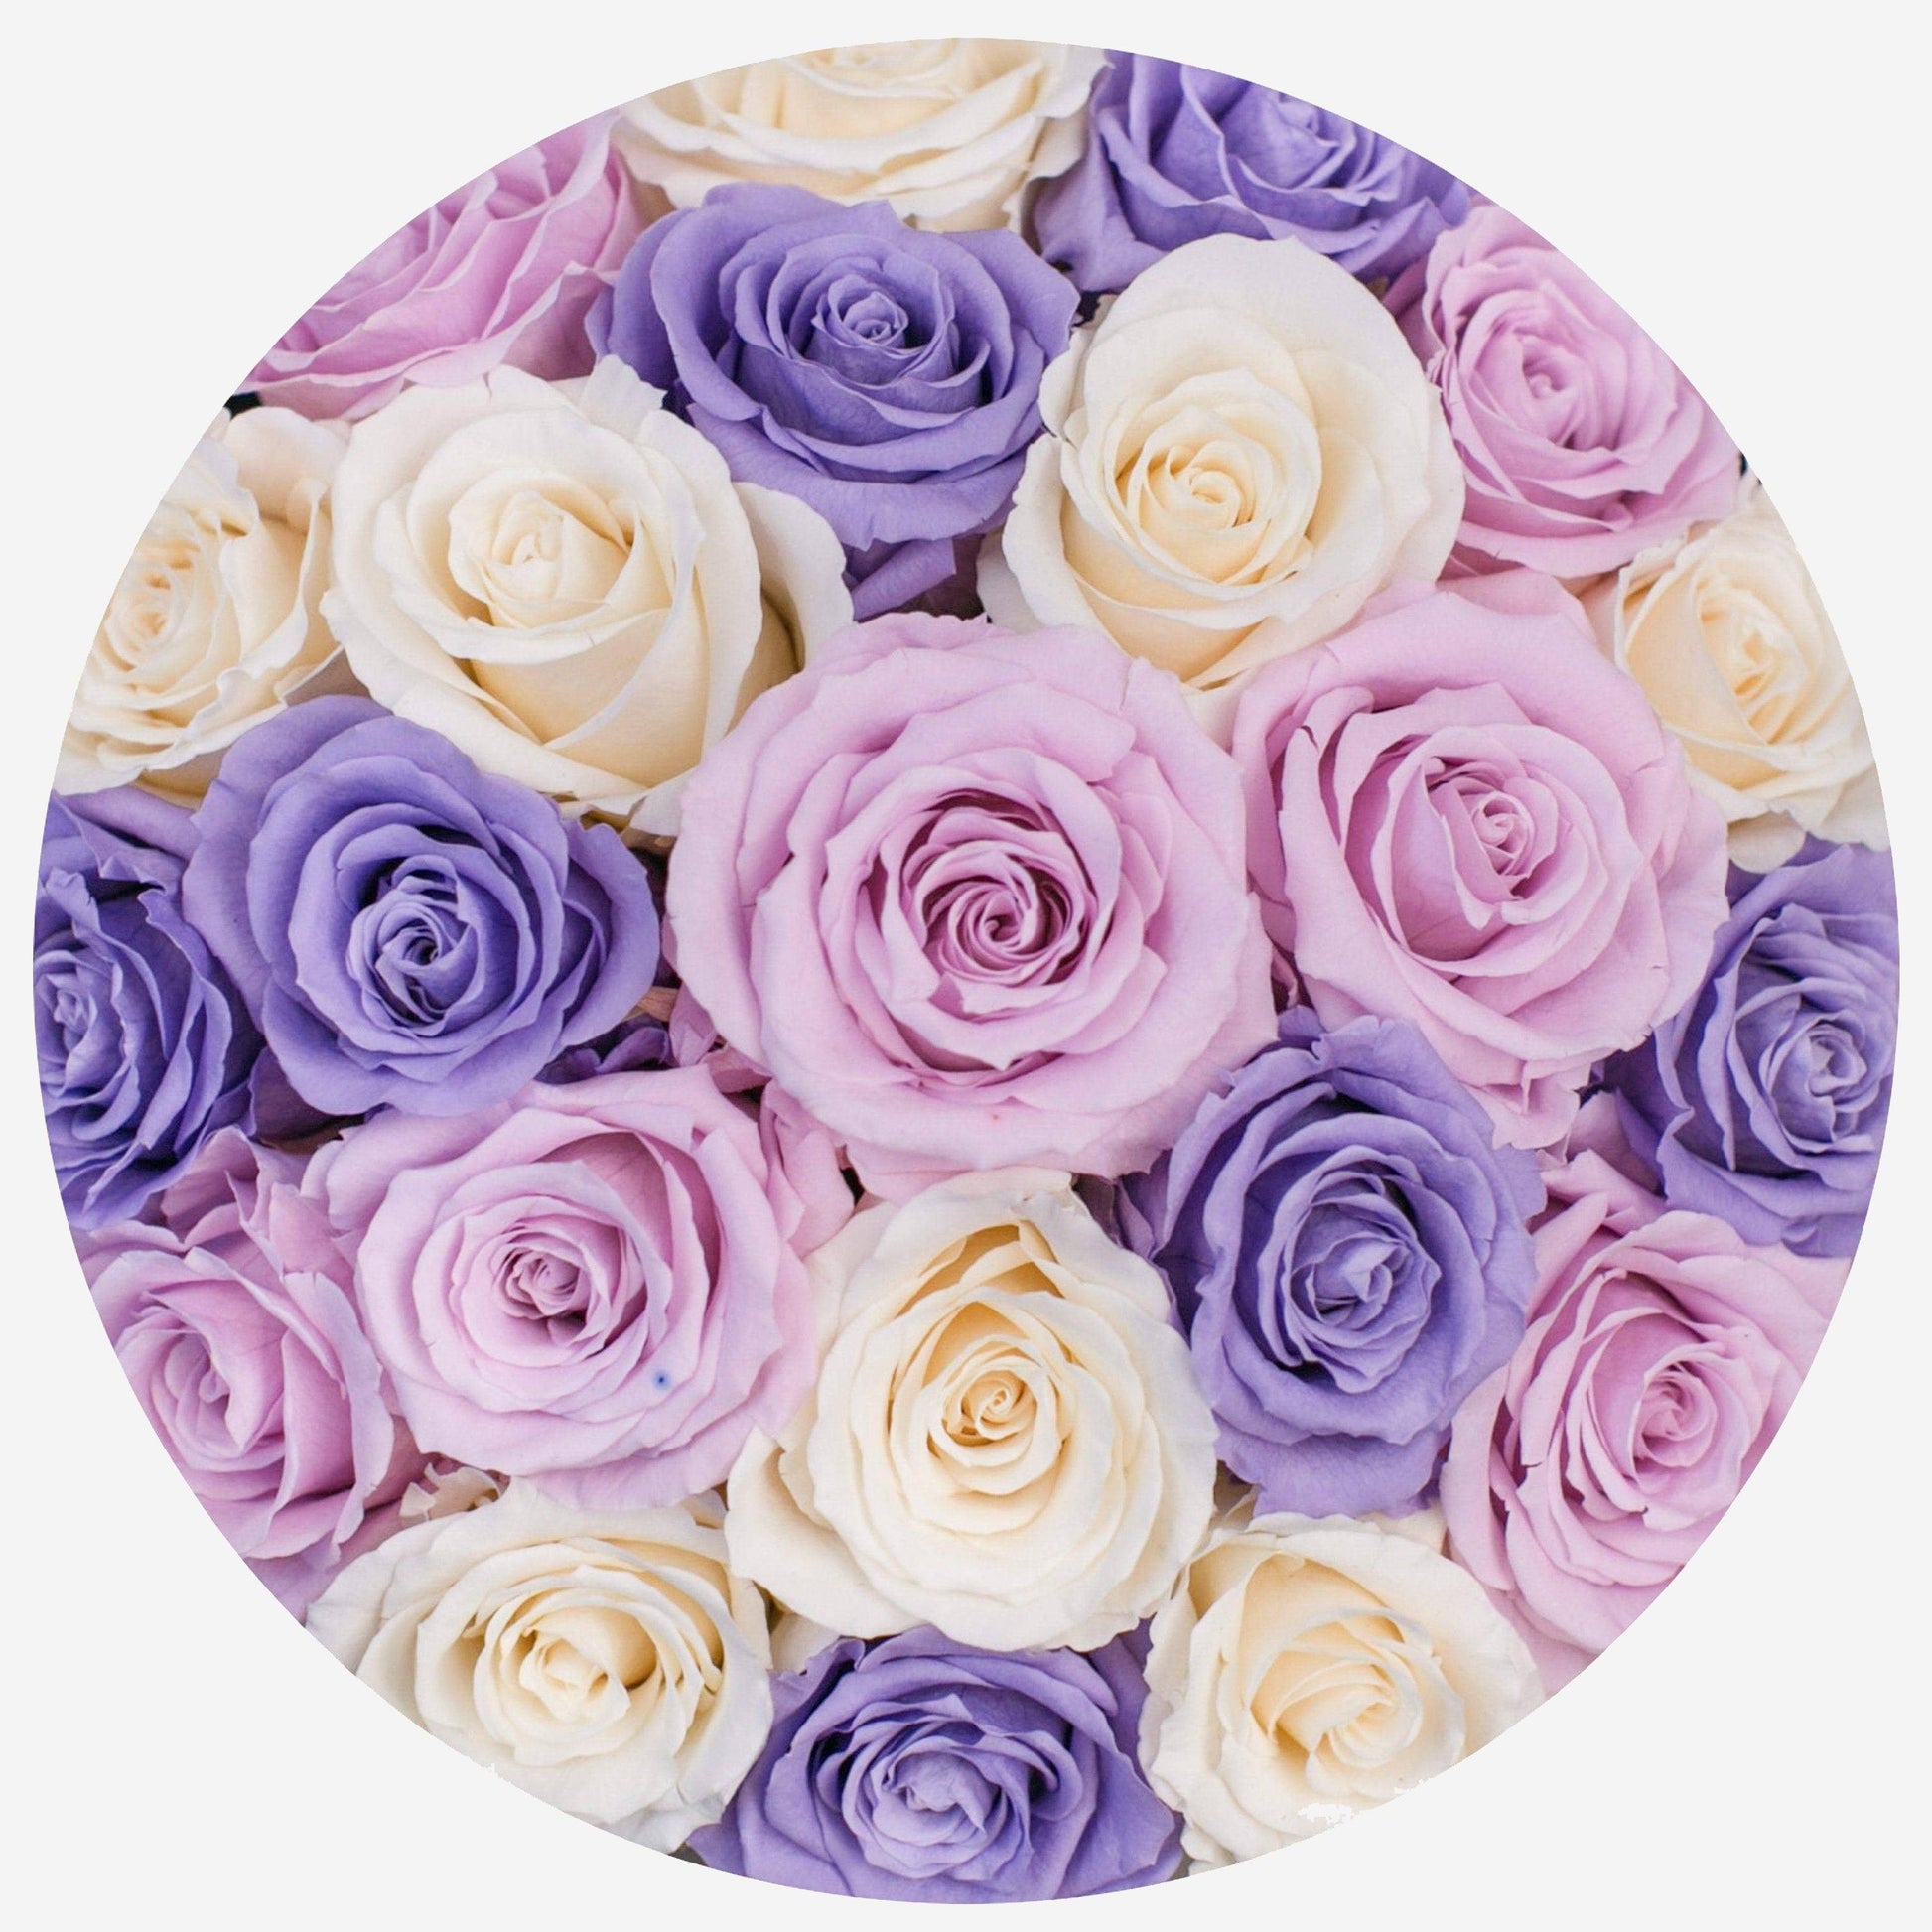 Classic Hot Pink Suede Dome Box | Lavender & Ivory & Pink Roses - The Million Roses